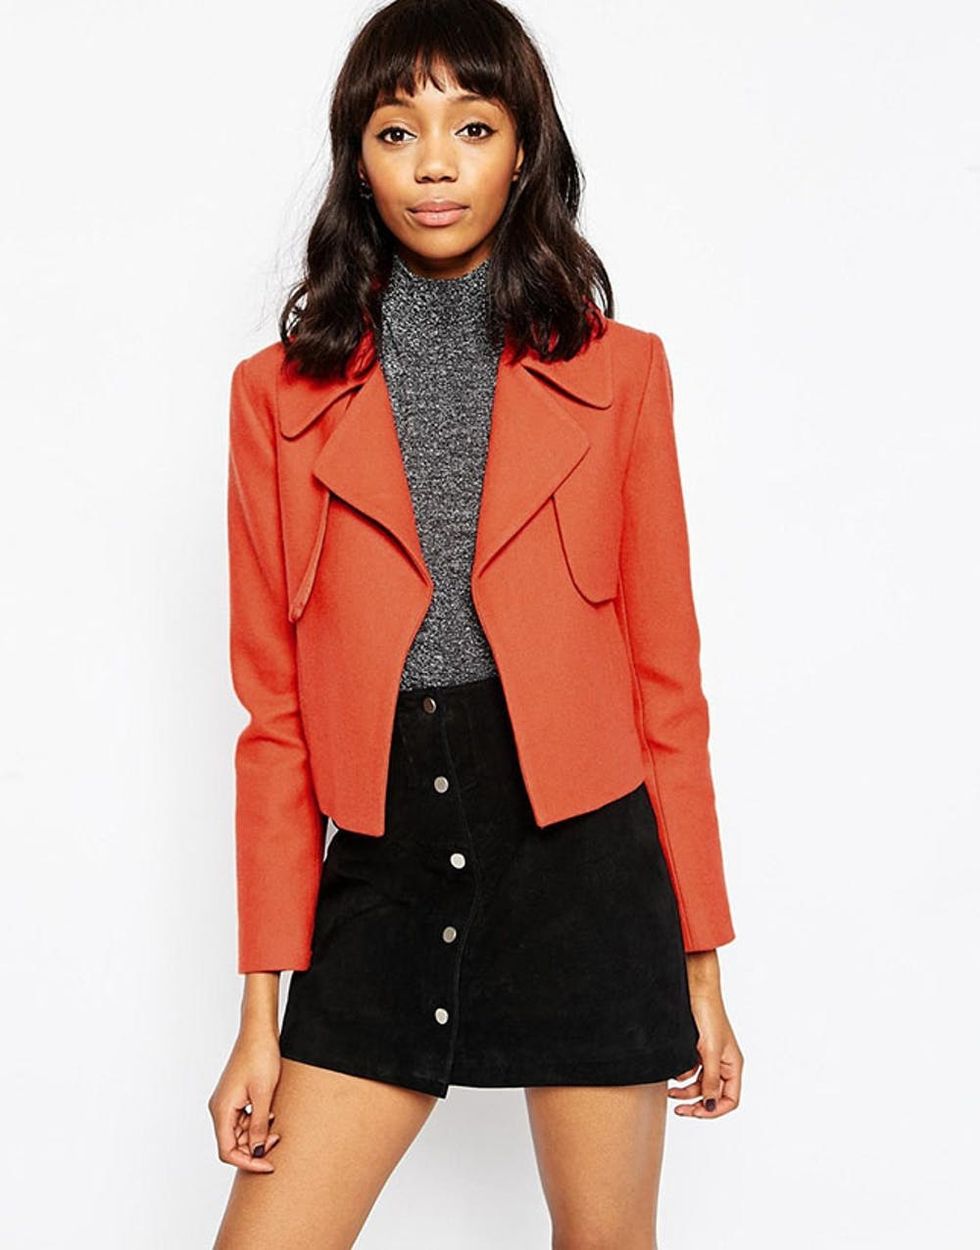 21 Transitional Coats You Need to Step Into Spring - Brit + Co